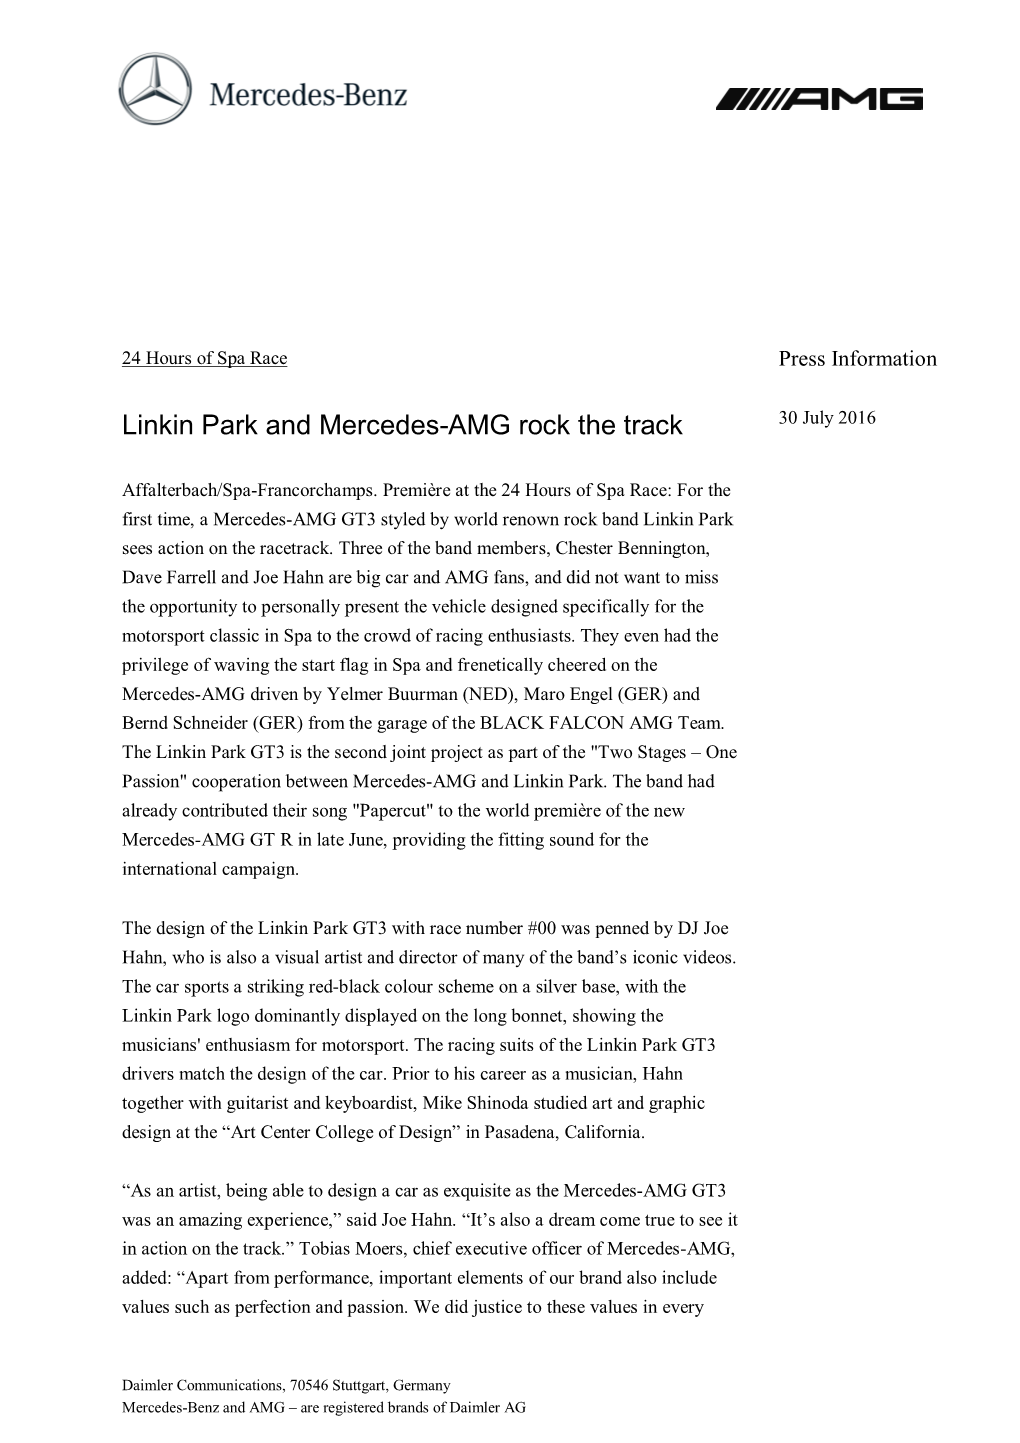 Linkin Park and Mercedes-AMG Rock the Track 30 July 2016